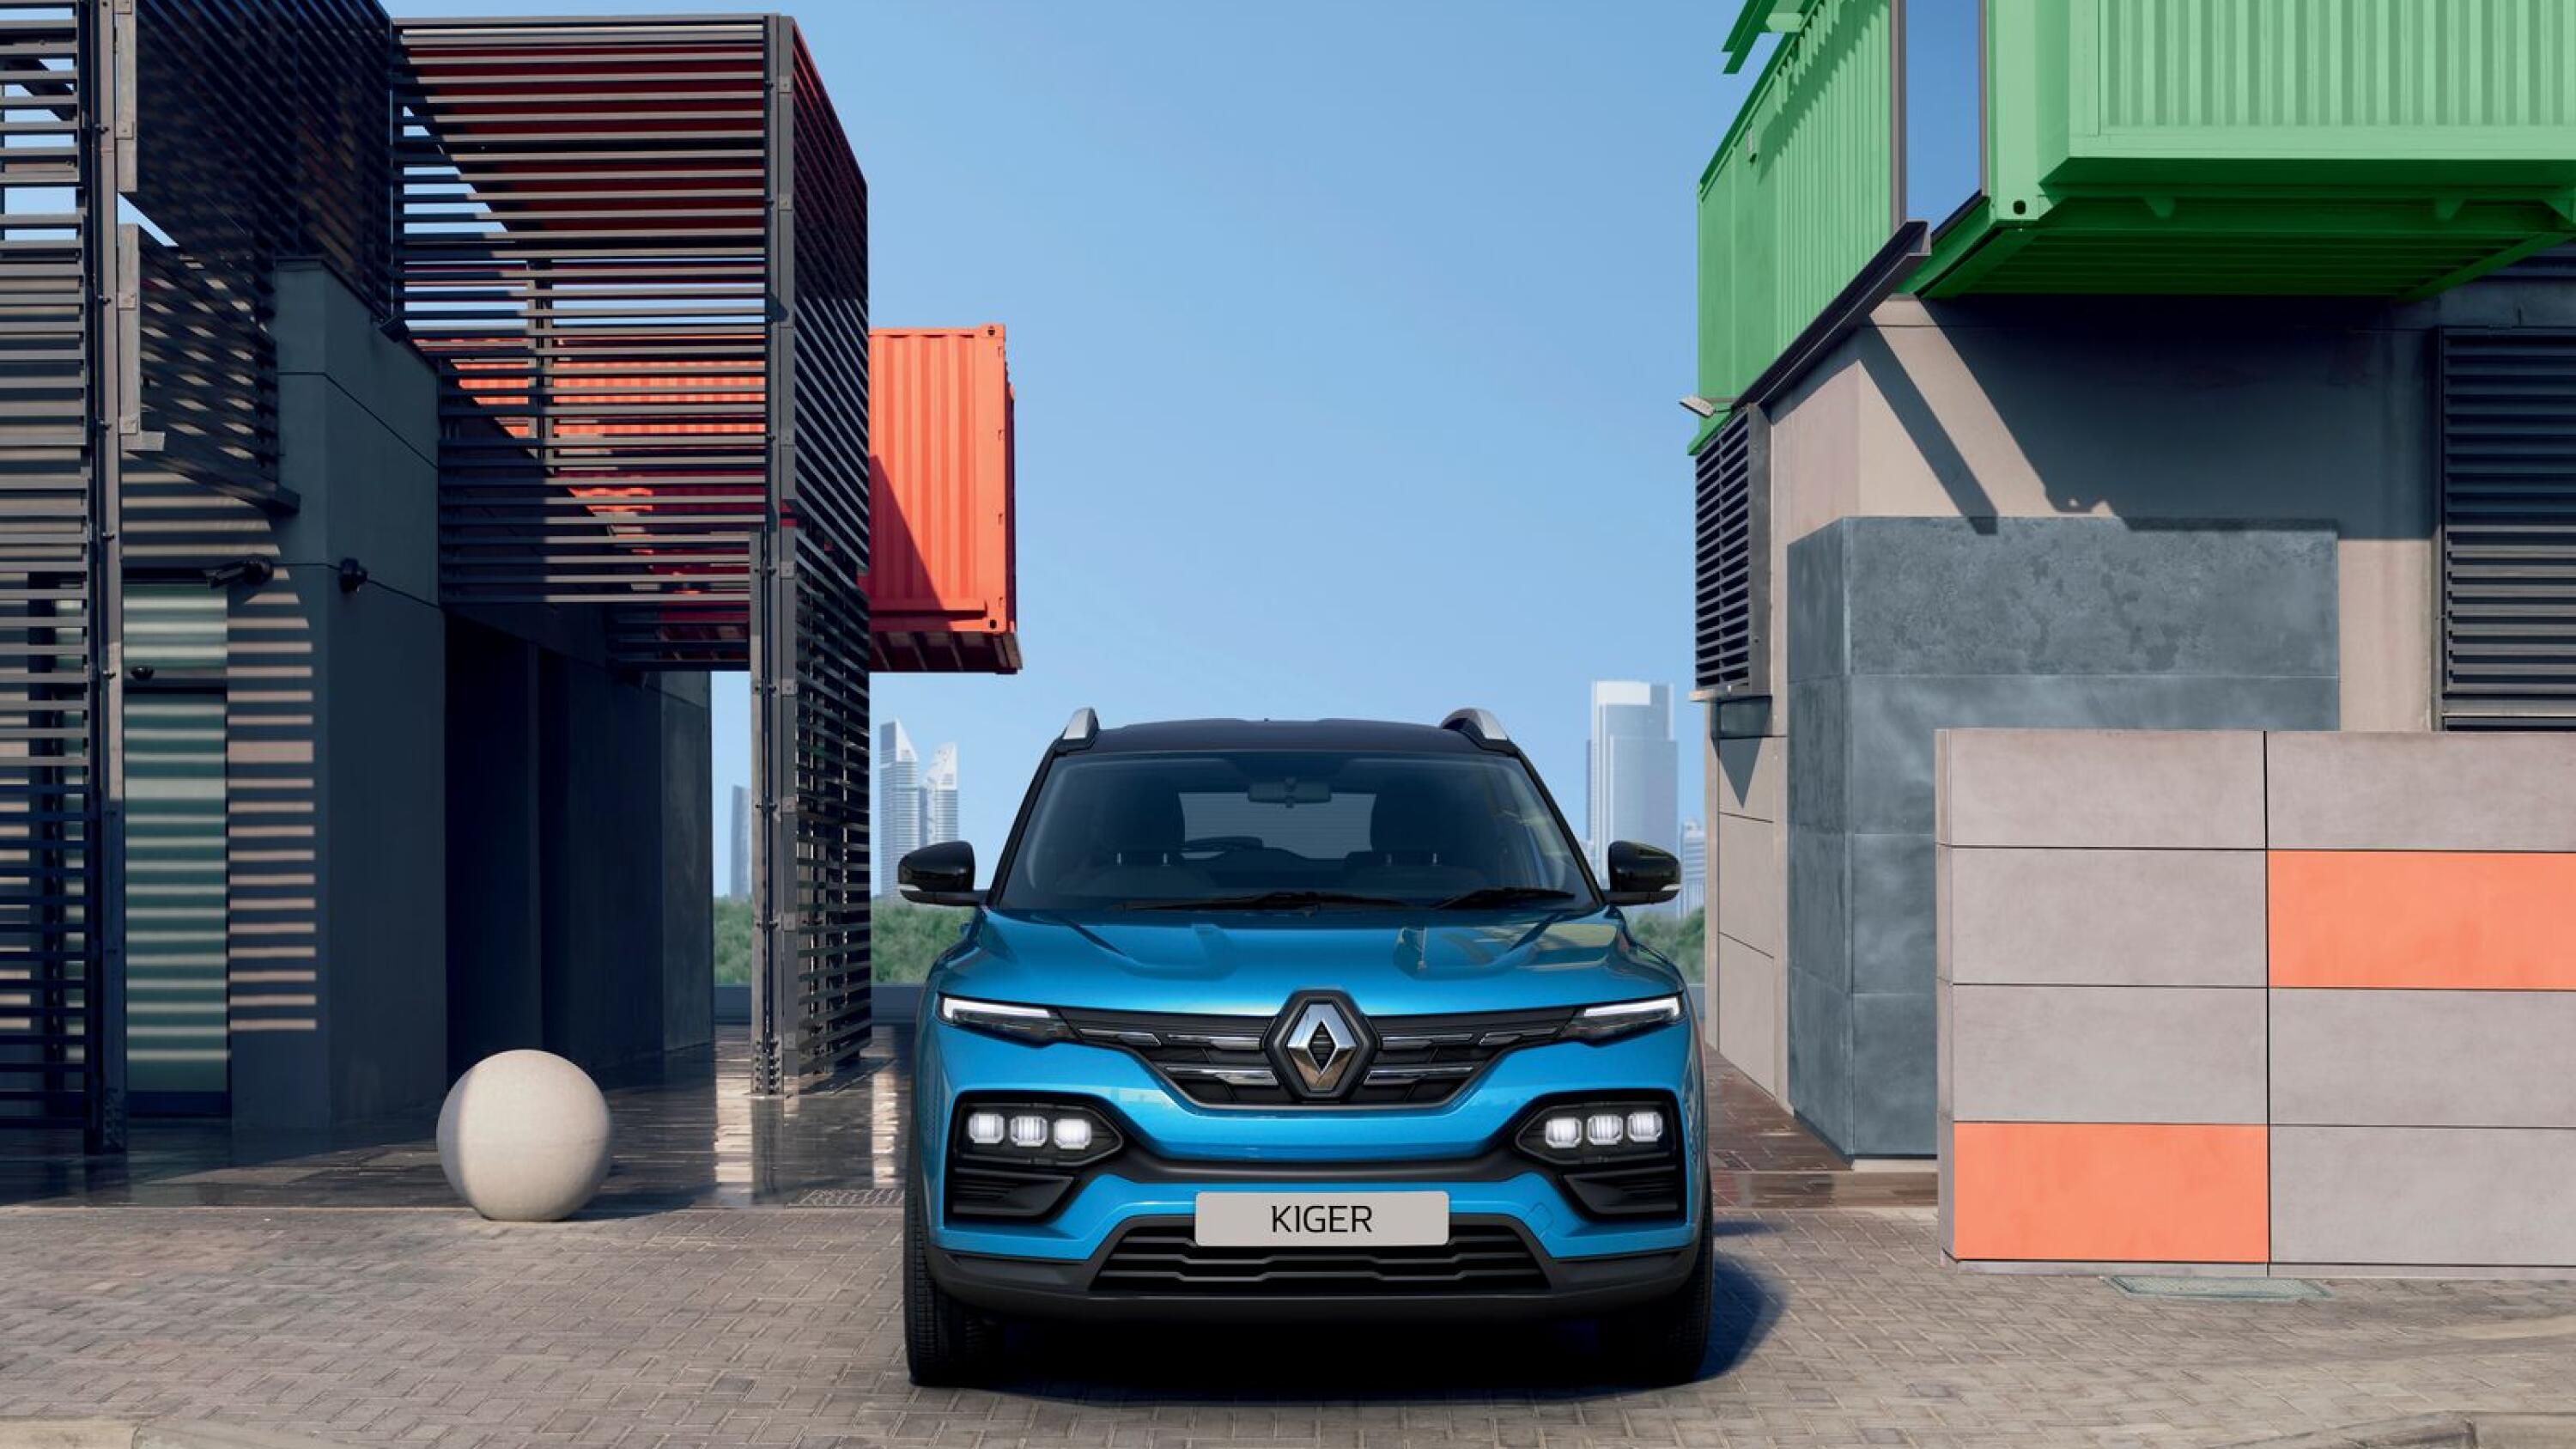 2021 Renault Kiger will replace the Renault Sandero in South Africa